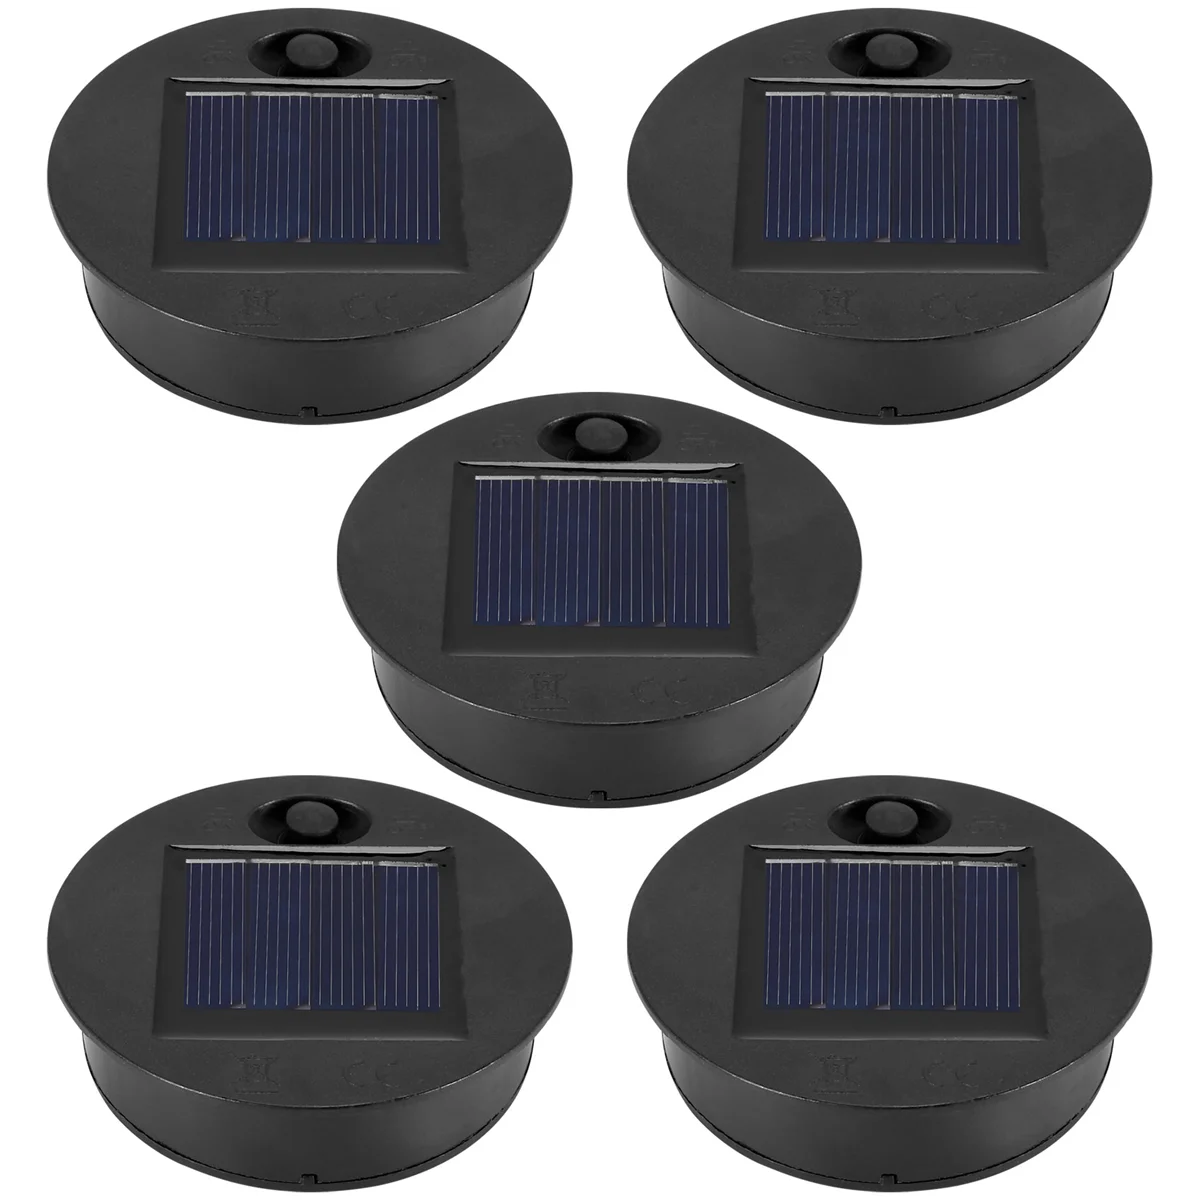 

5 Pack Replacement Solar Light Parts(Top Size 2.76 Inches, Bottom Size 2.36 Inches),7 Lumens Warm White LED Waterproof